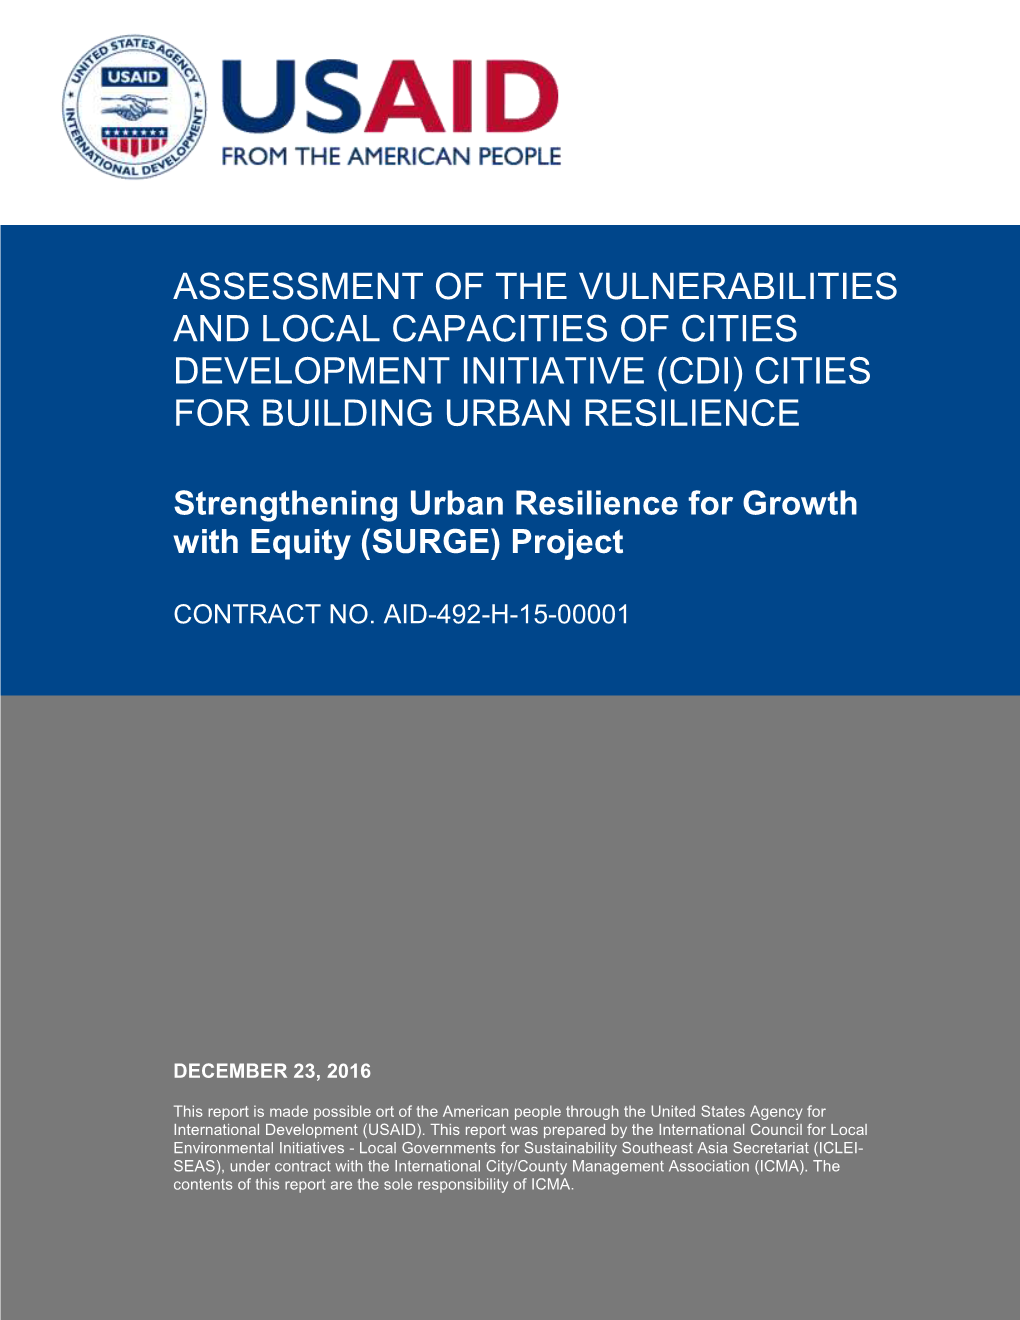 Assessment of the Vulnerabilities and Local Capacities of Cities Development Initiative (Cdi) Cities for Building Urban Resilience